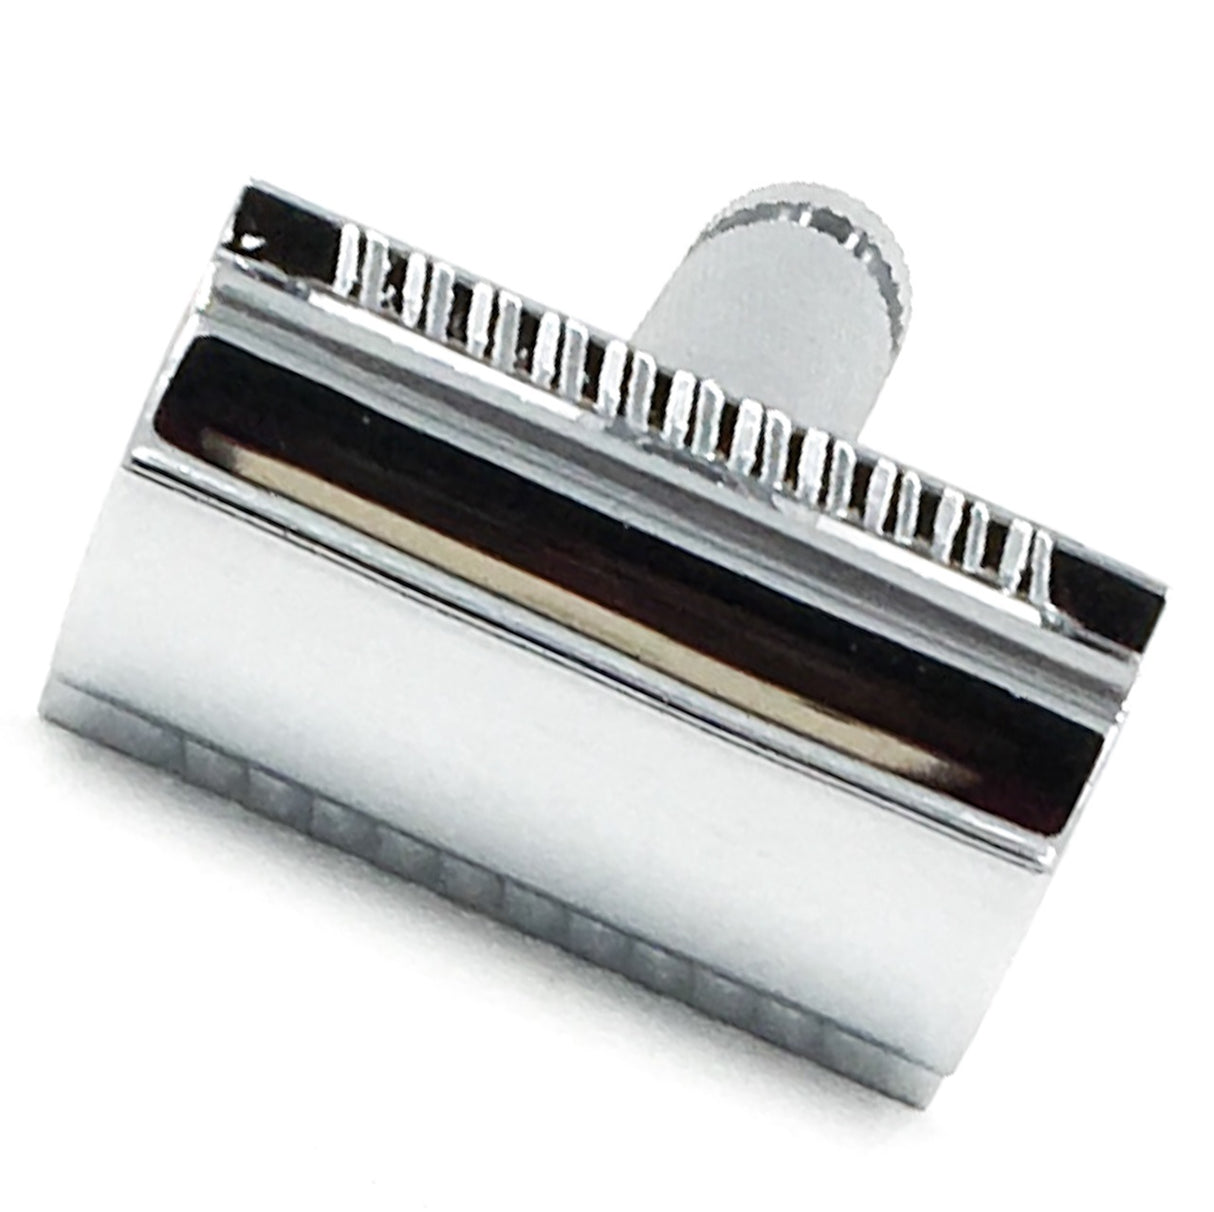 The Parker 97R razor has a traditional 3-inch long handle, which is crafted from solid brass and chrome plated. This razor’s precision engineering and heft are no challenge for tackling the toughest of beards. This razor is an excellent choice for both new and experienced safety razor users.